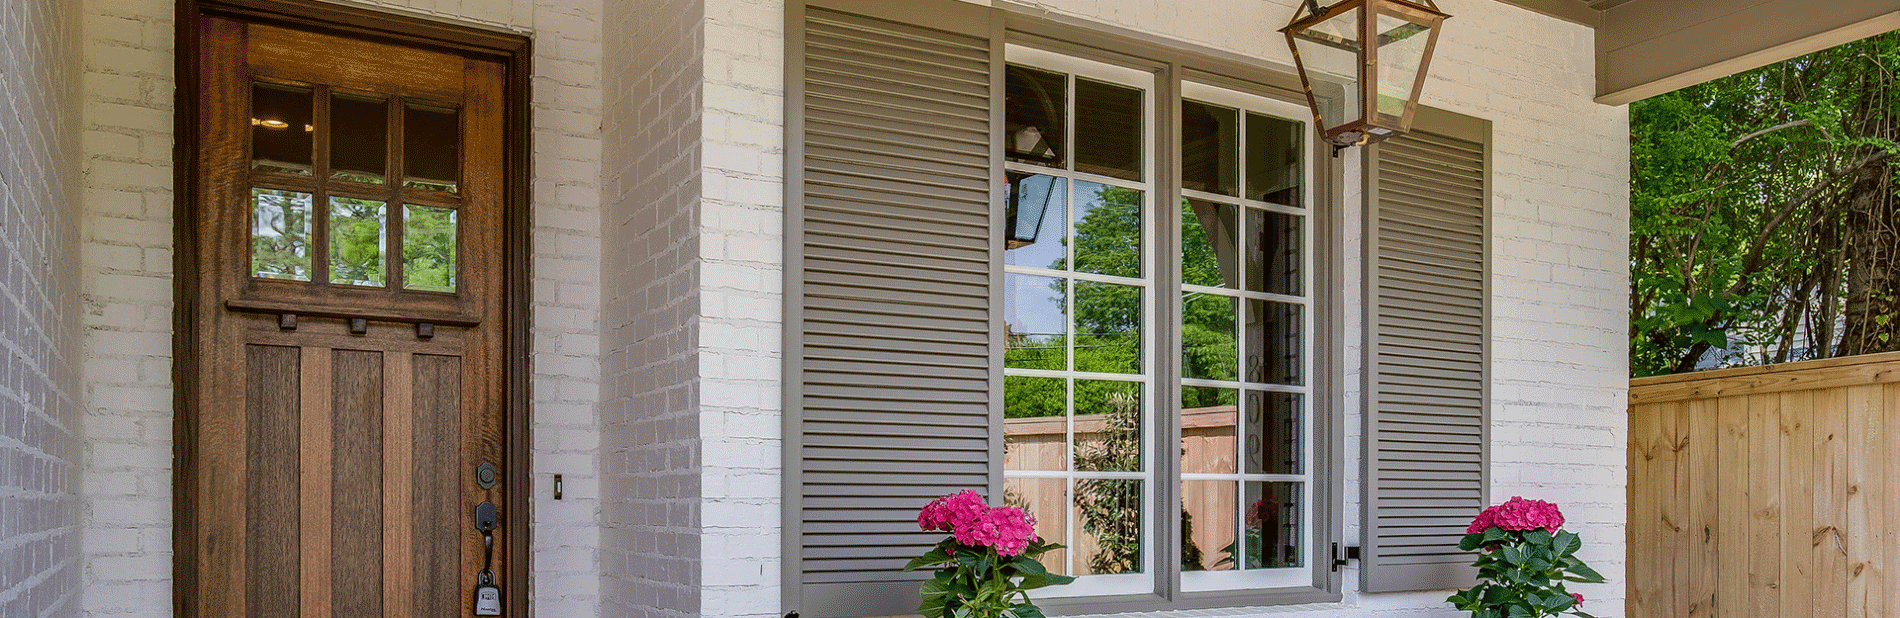 Exterior Wood Shutters  Fixed Louver Shutters